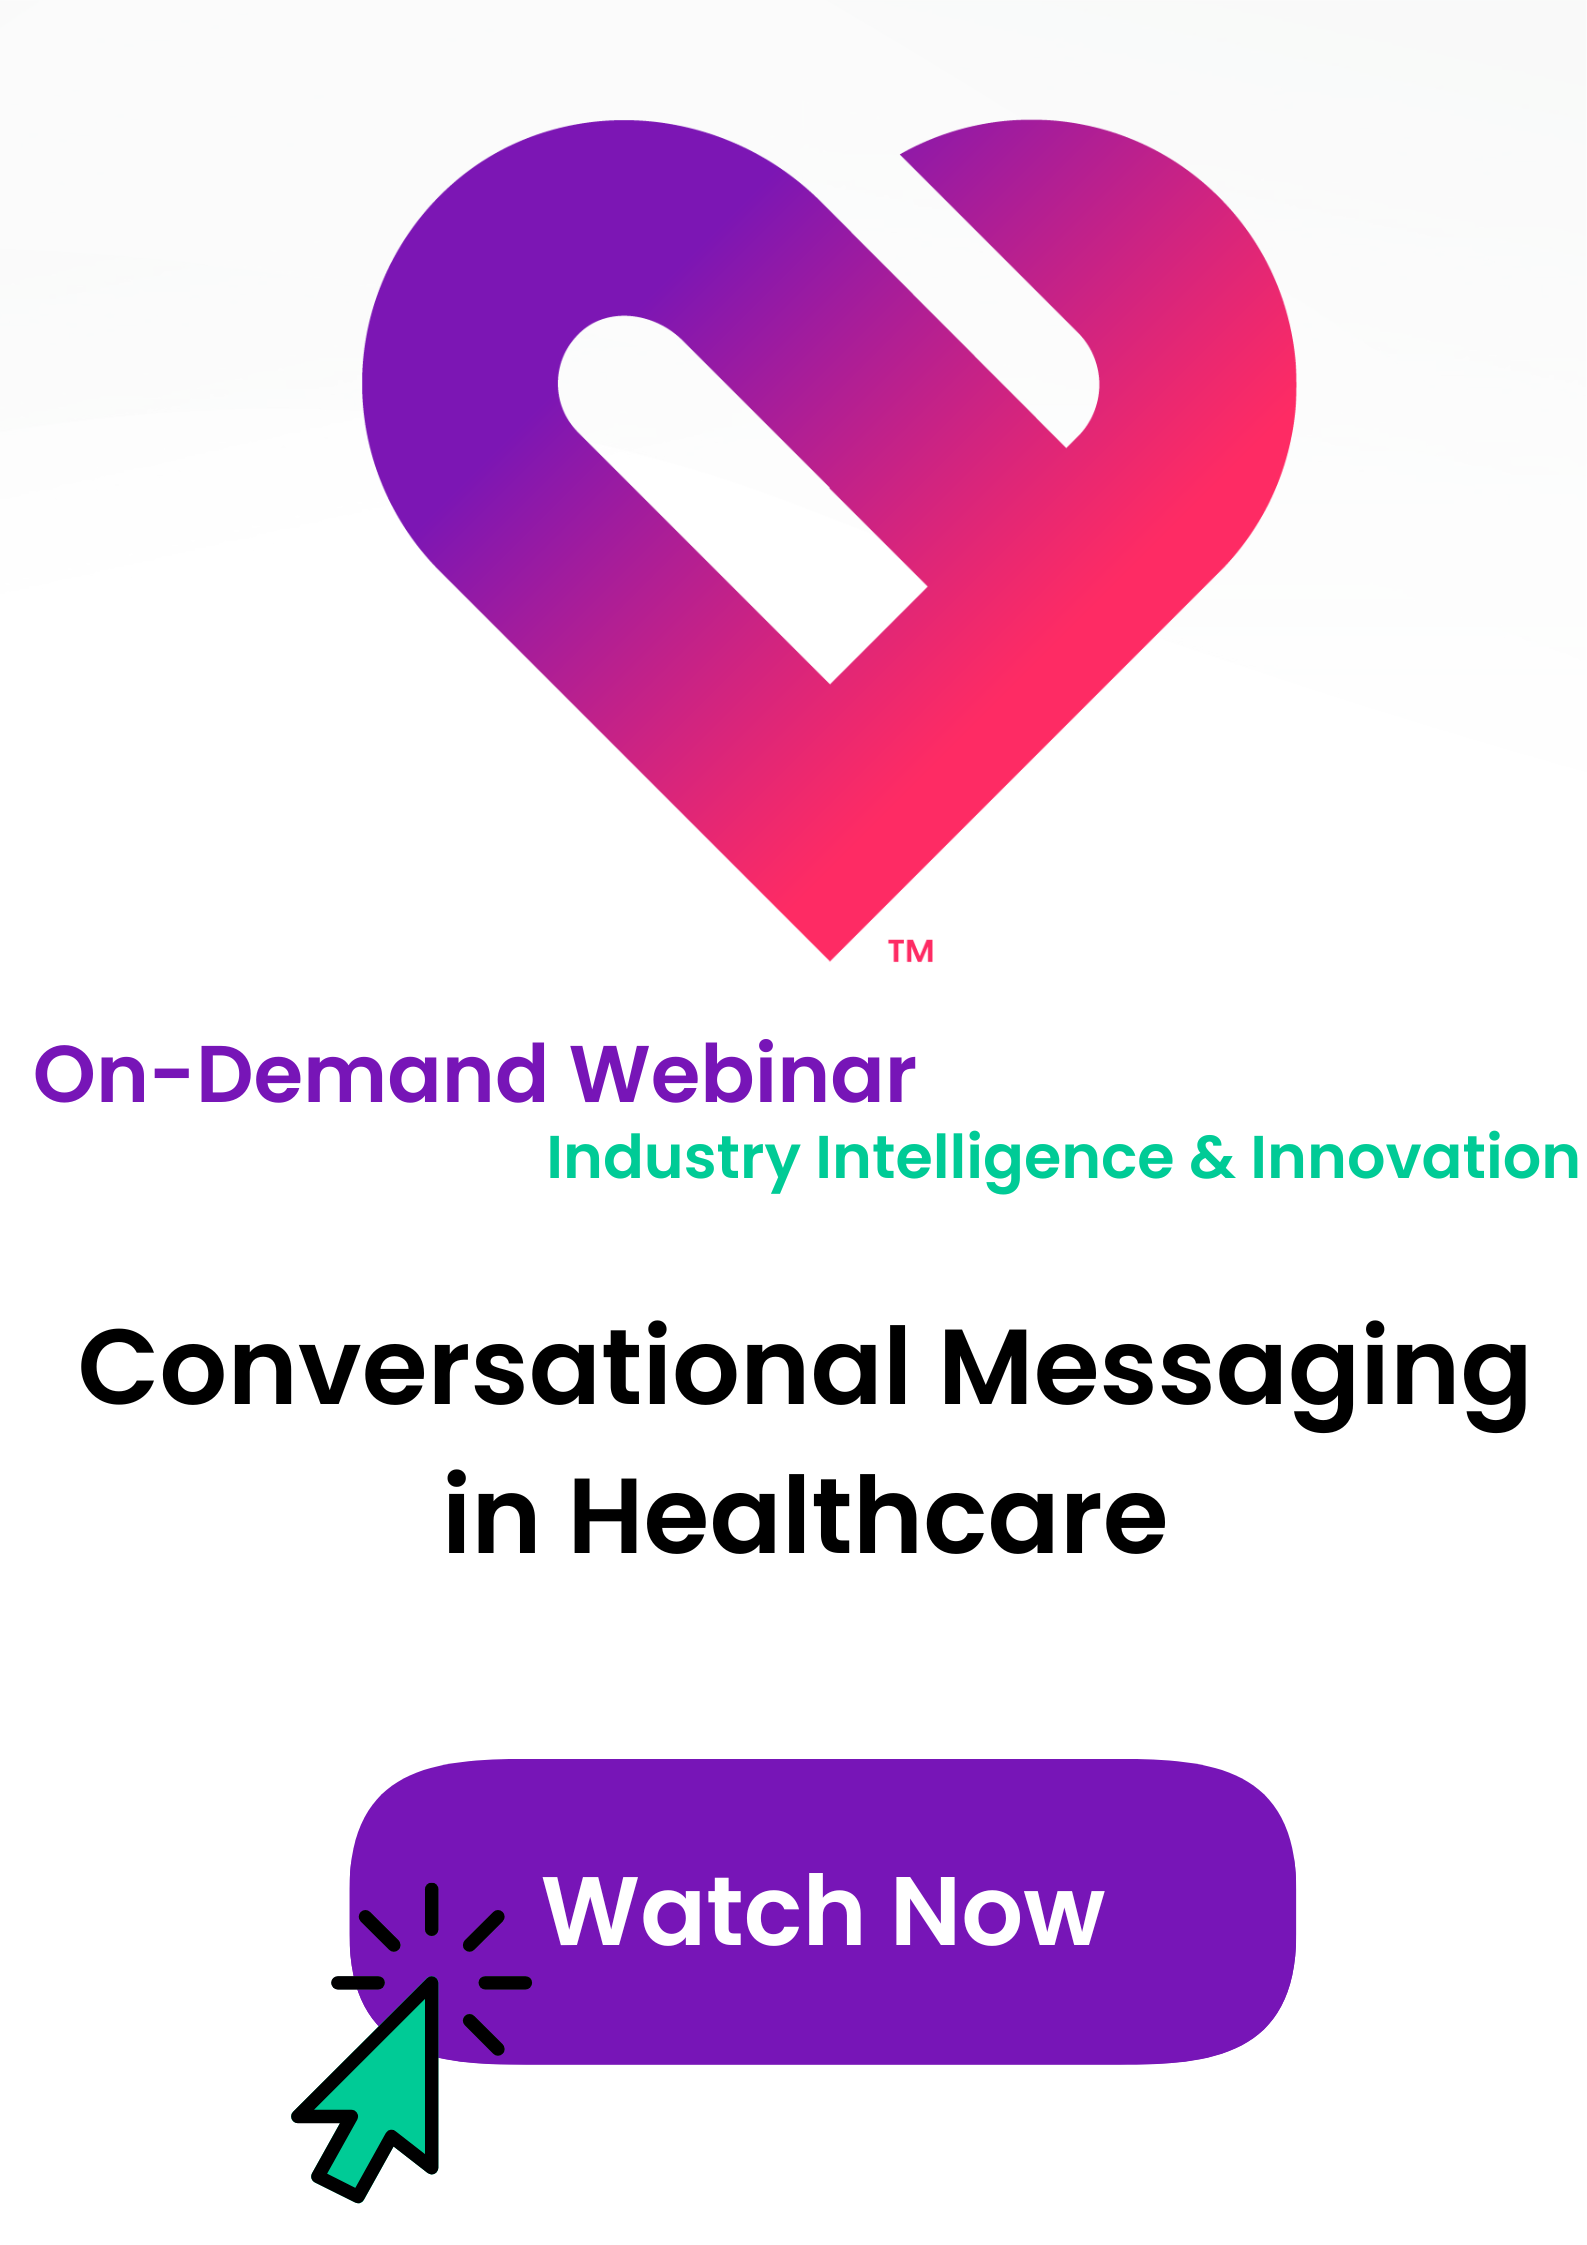 On-demand webinar tile for Converational Messaging in Healthcare, click to watch now